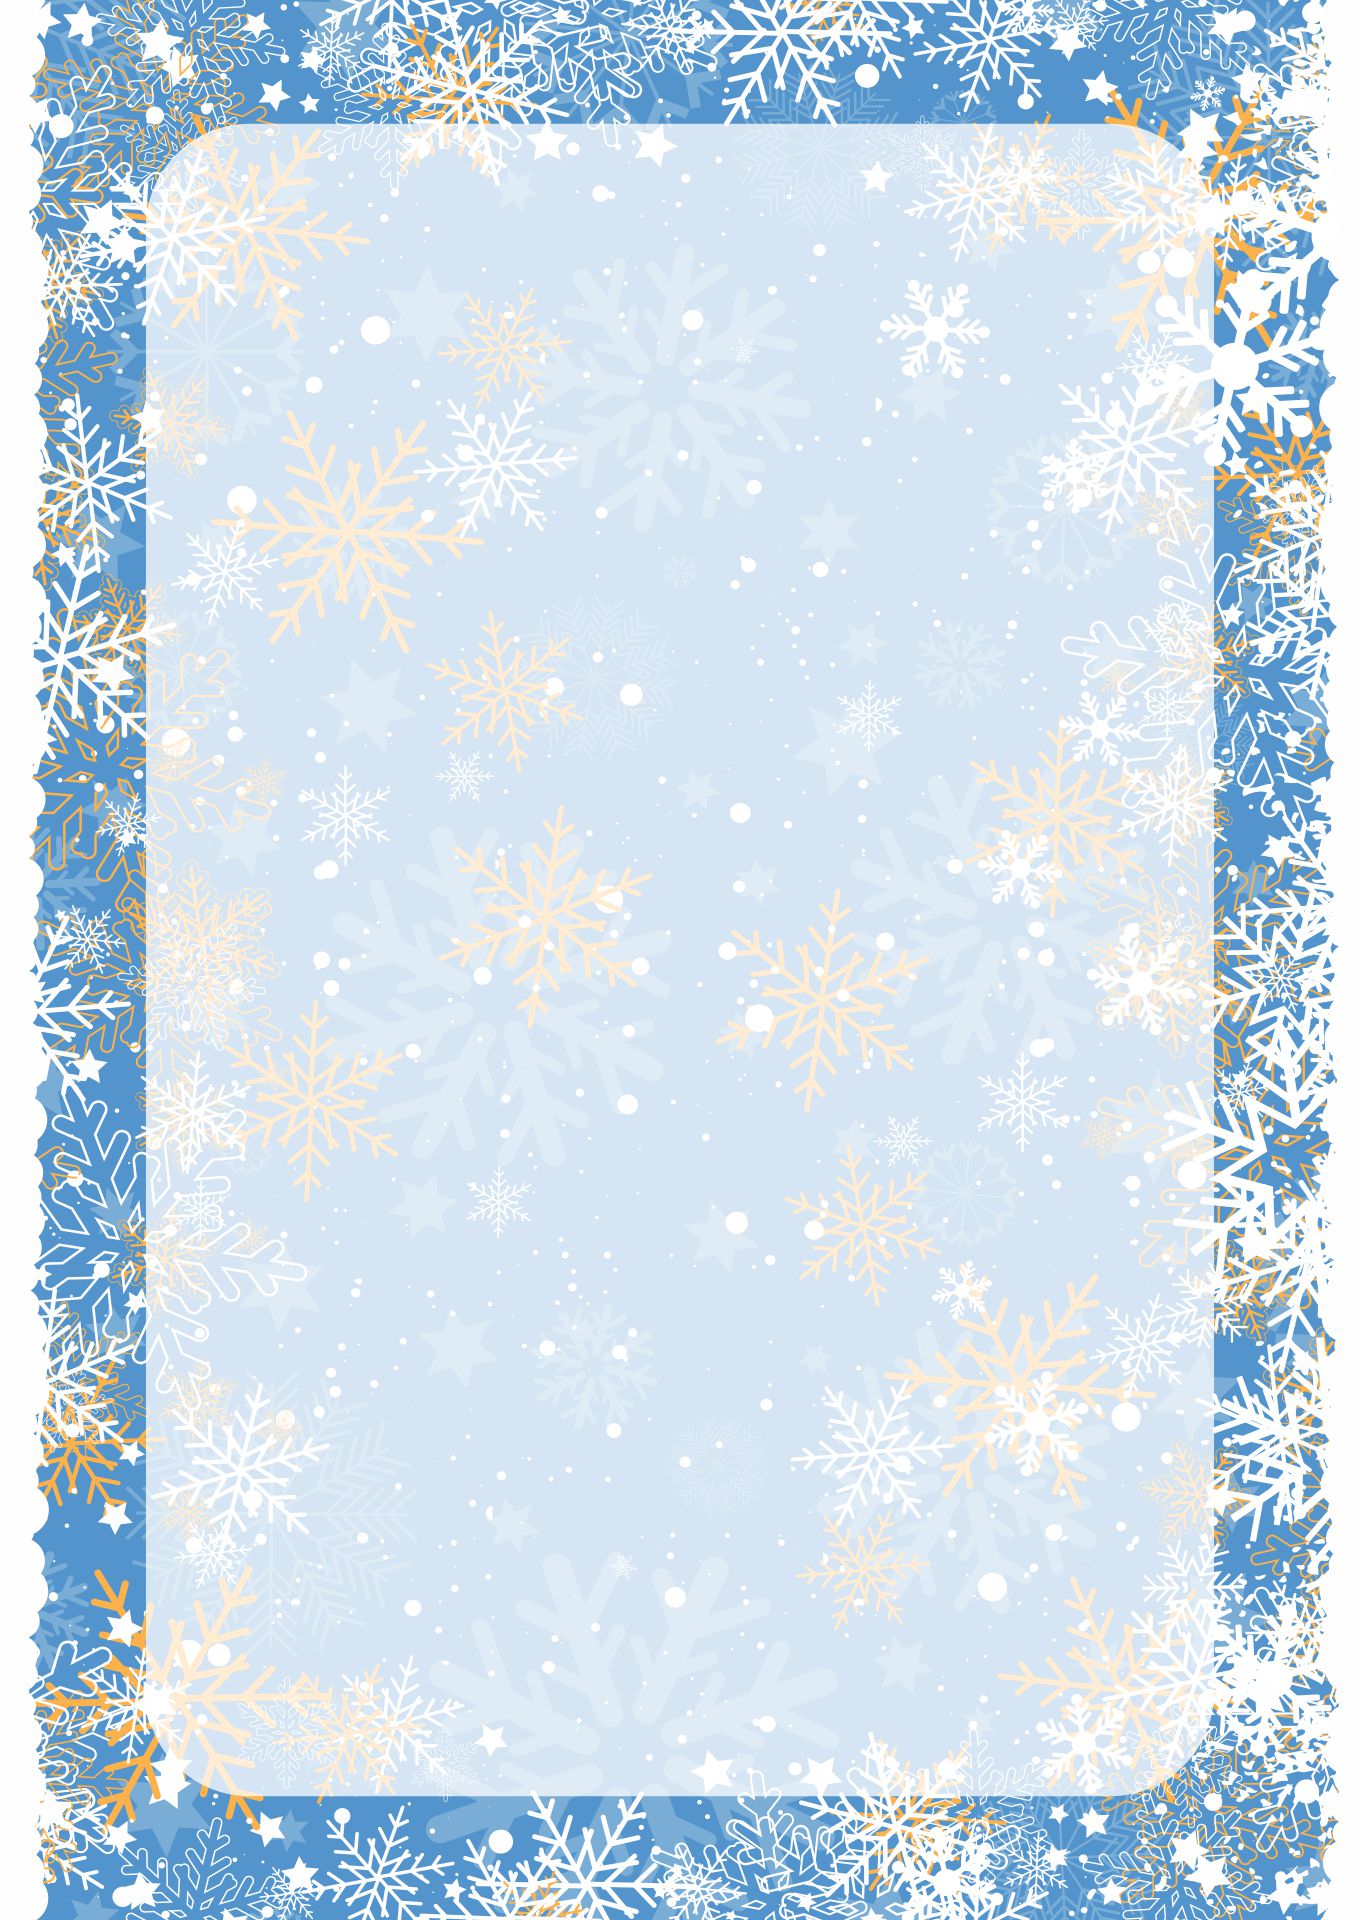 10-best-printable-christmas-borders-and-background-pdf-for-free-at